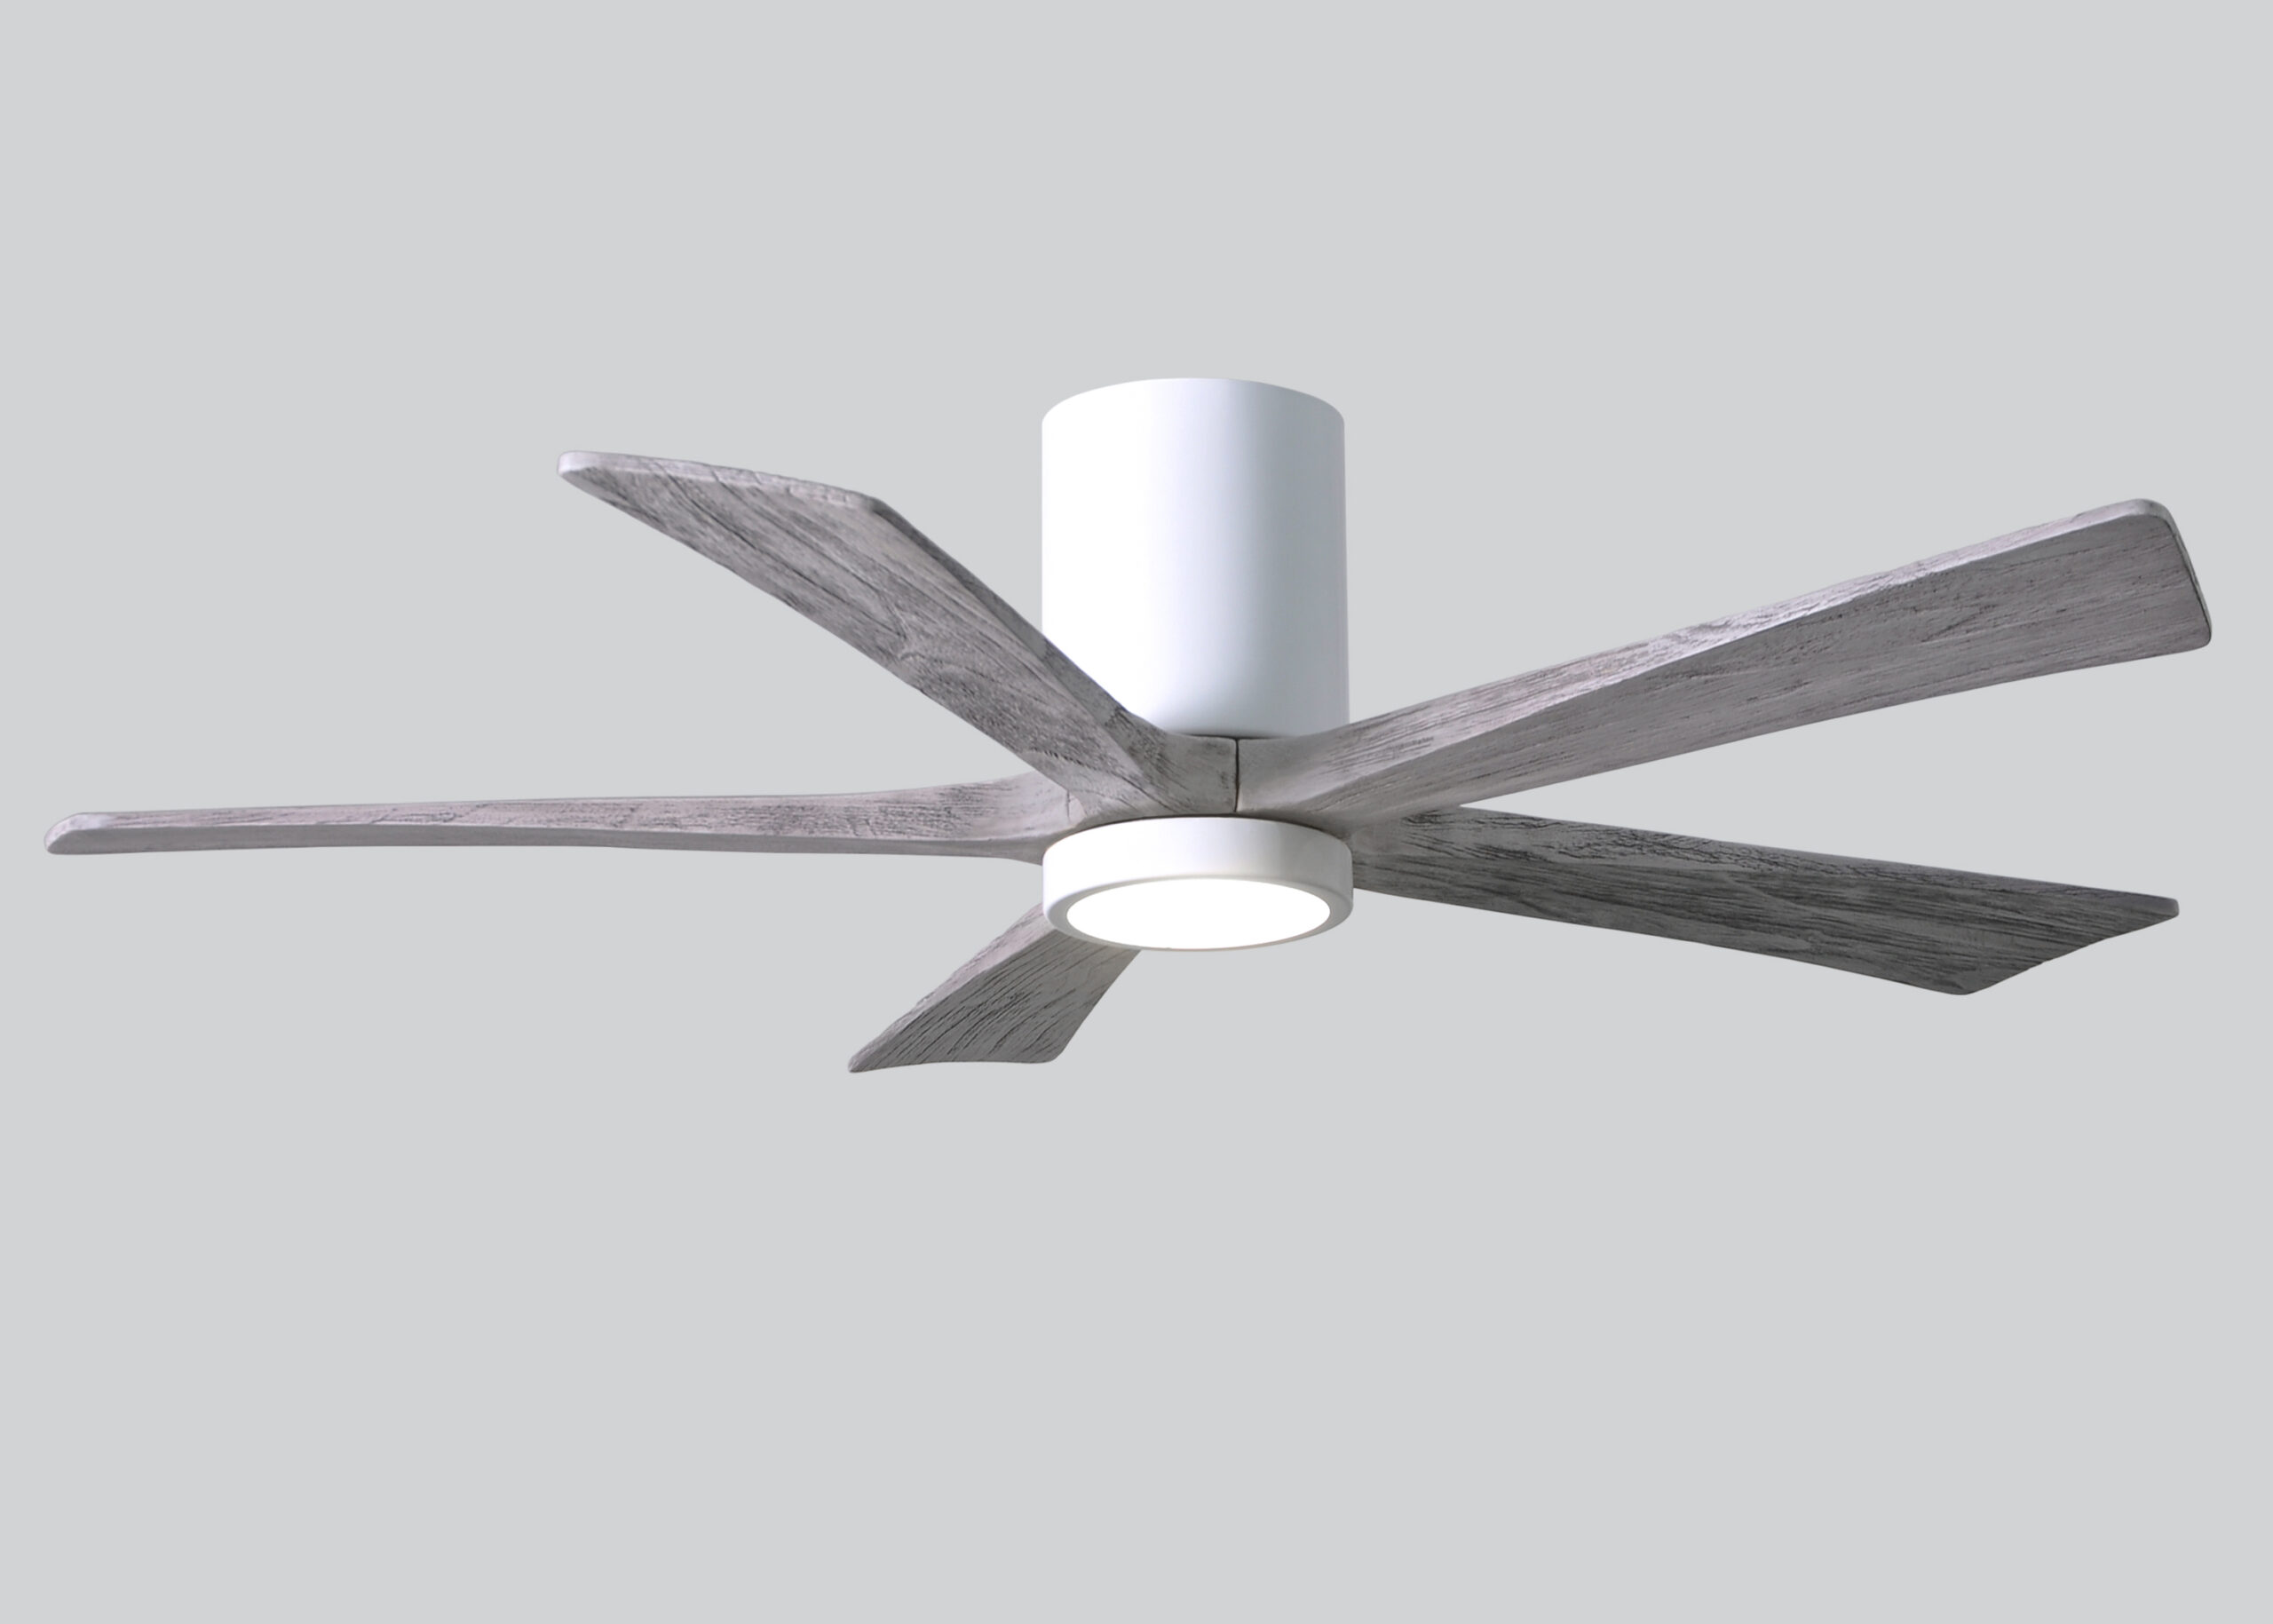 Irene-5HLK Ceiling Fan in Gloss White Finish with 52